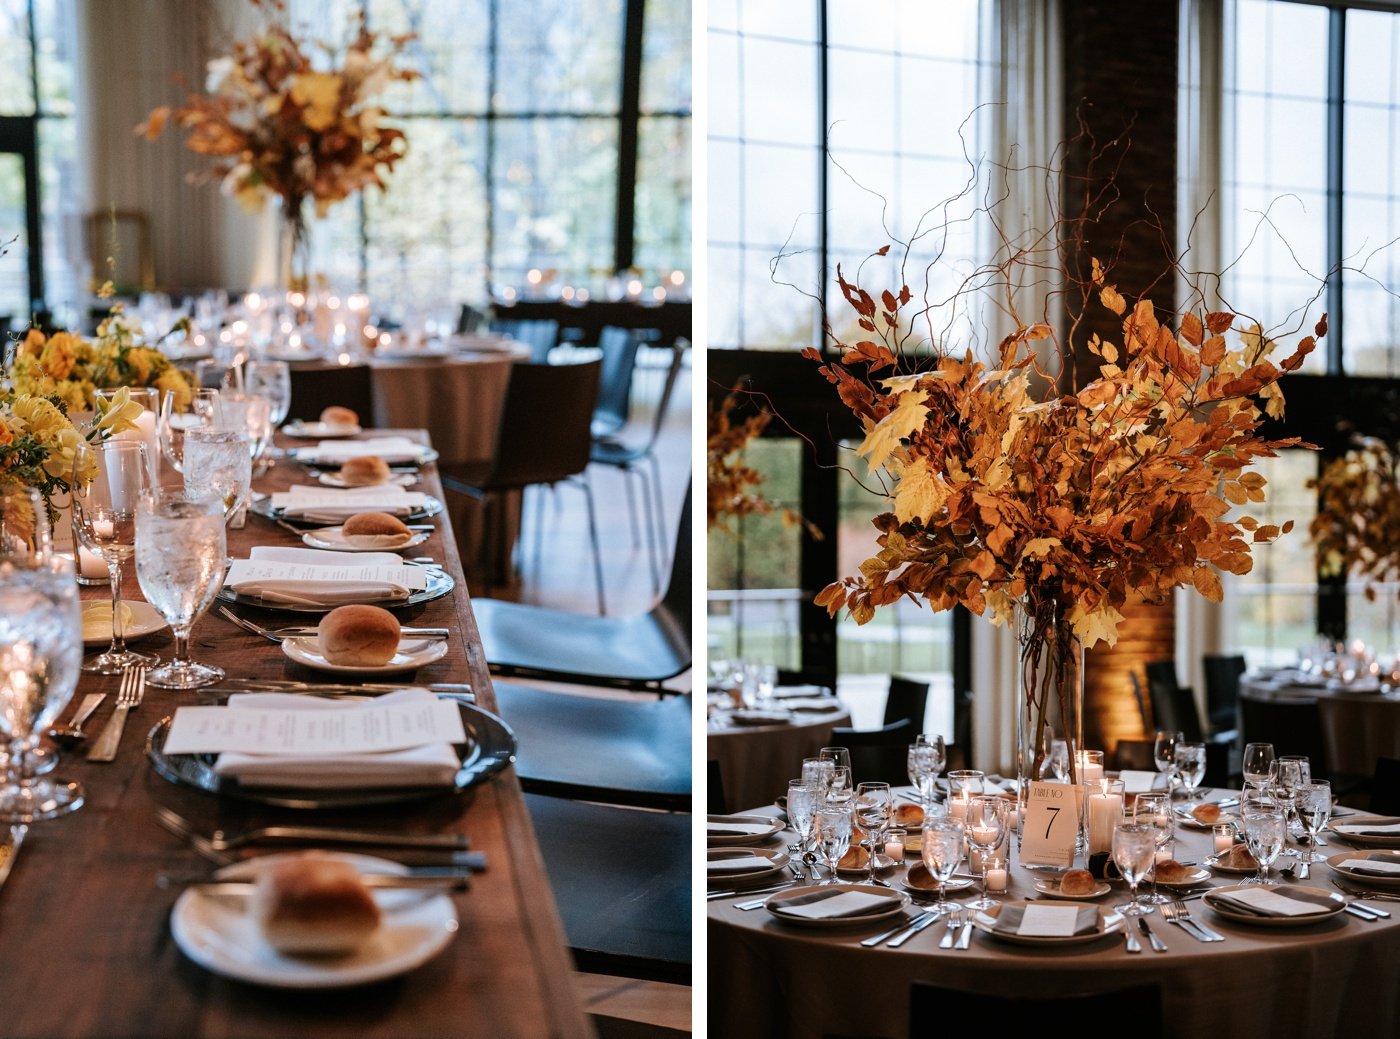 A centerpiece with fall leaves and branches by Athabold